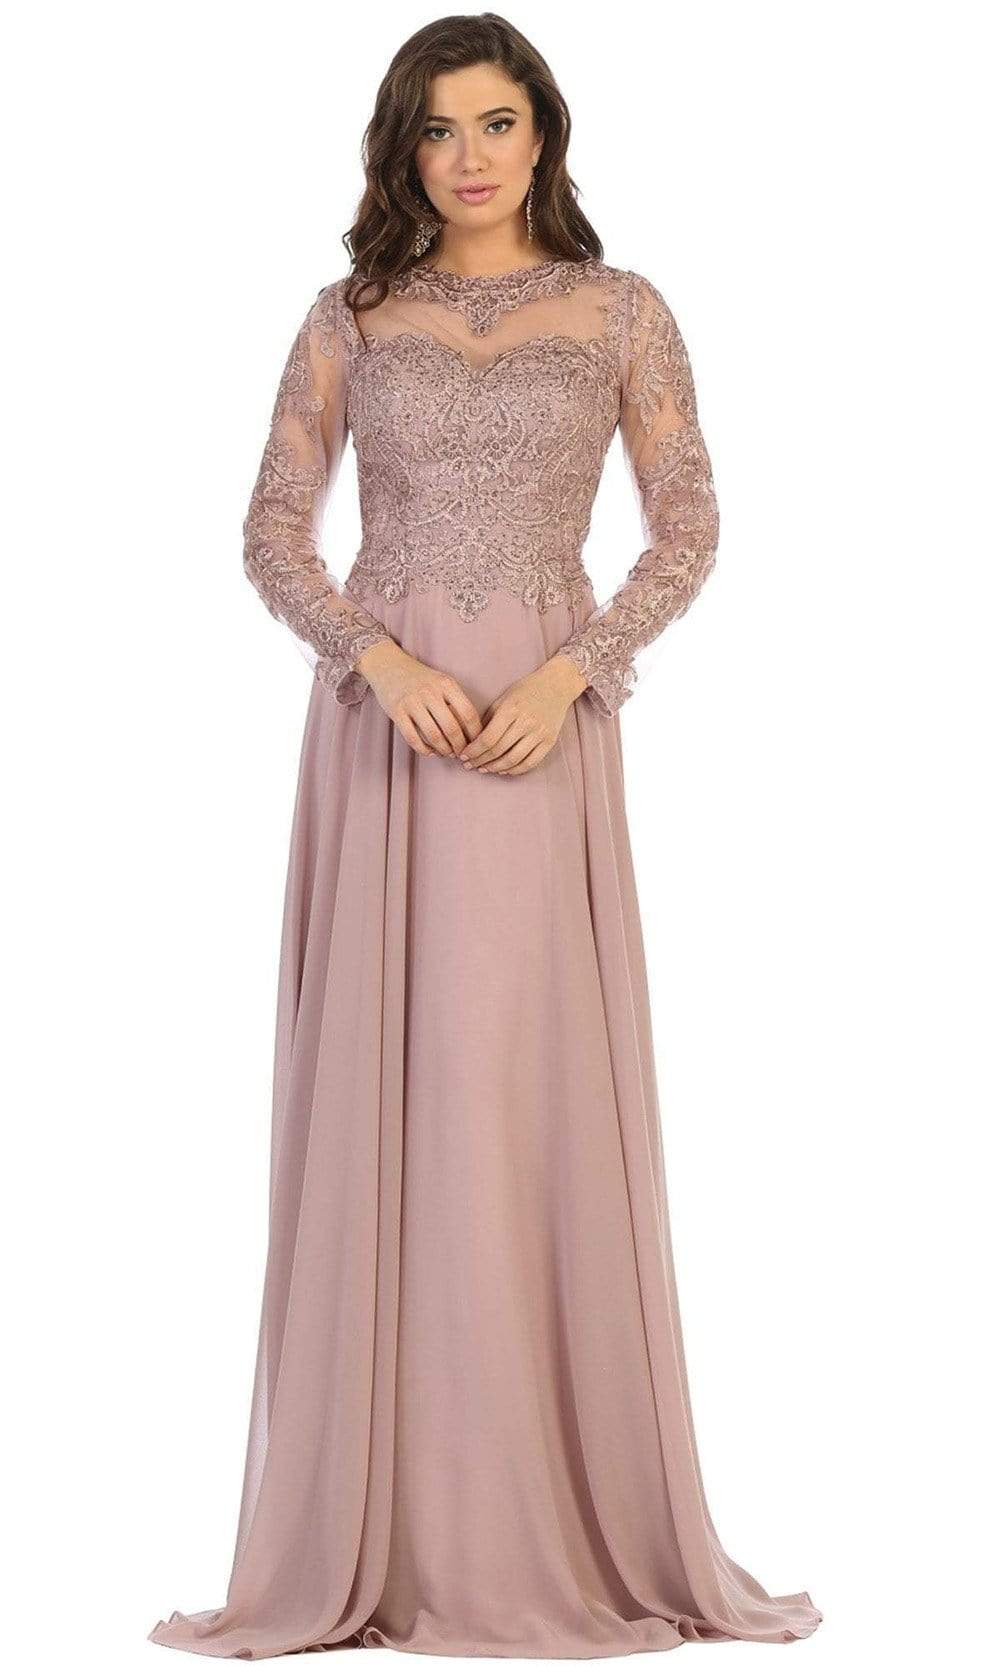 May Queen - RQ7732 Embroidered Long Sleeve Bateau A-line Dress Special Occasion Dress M / Mauve